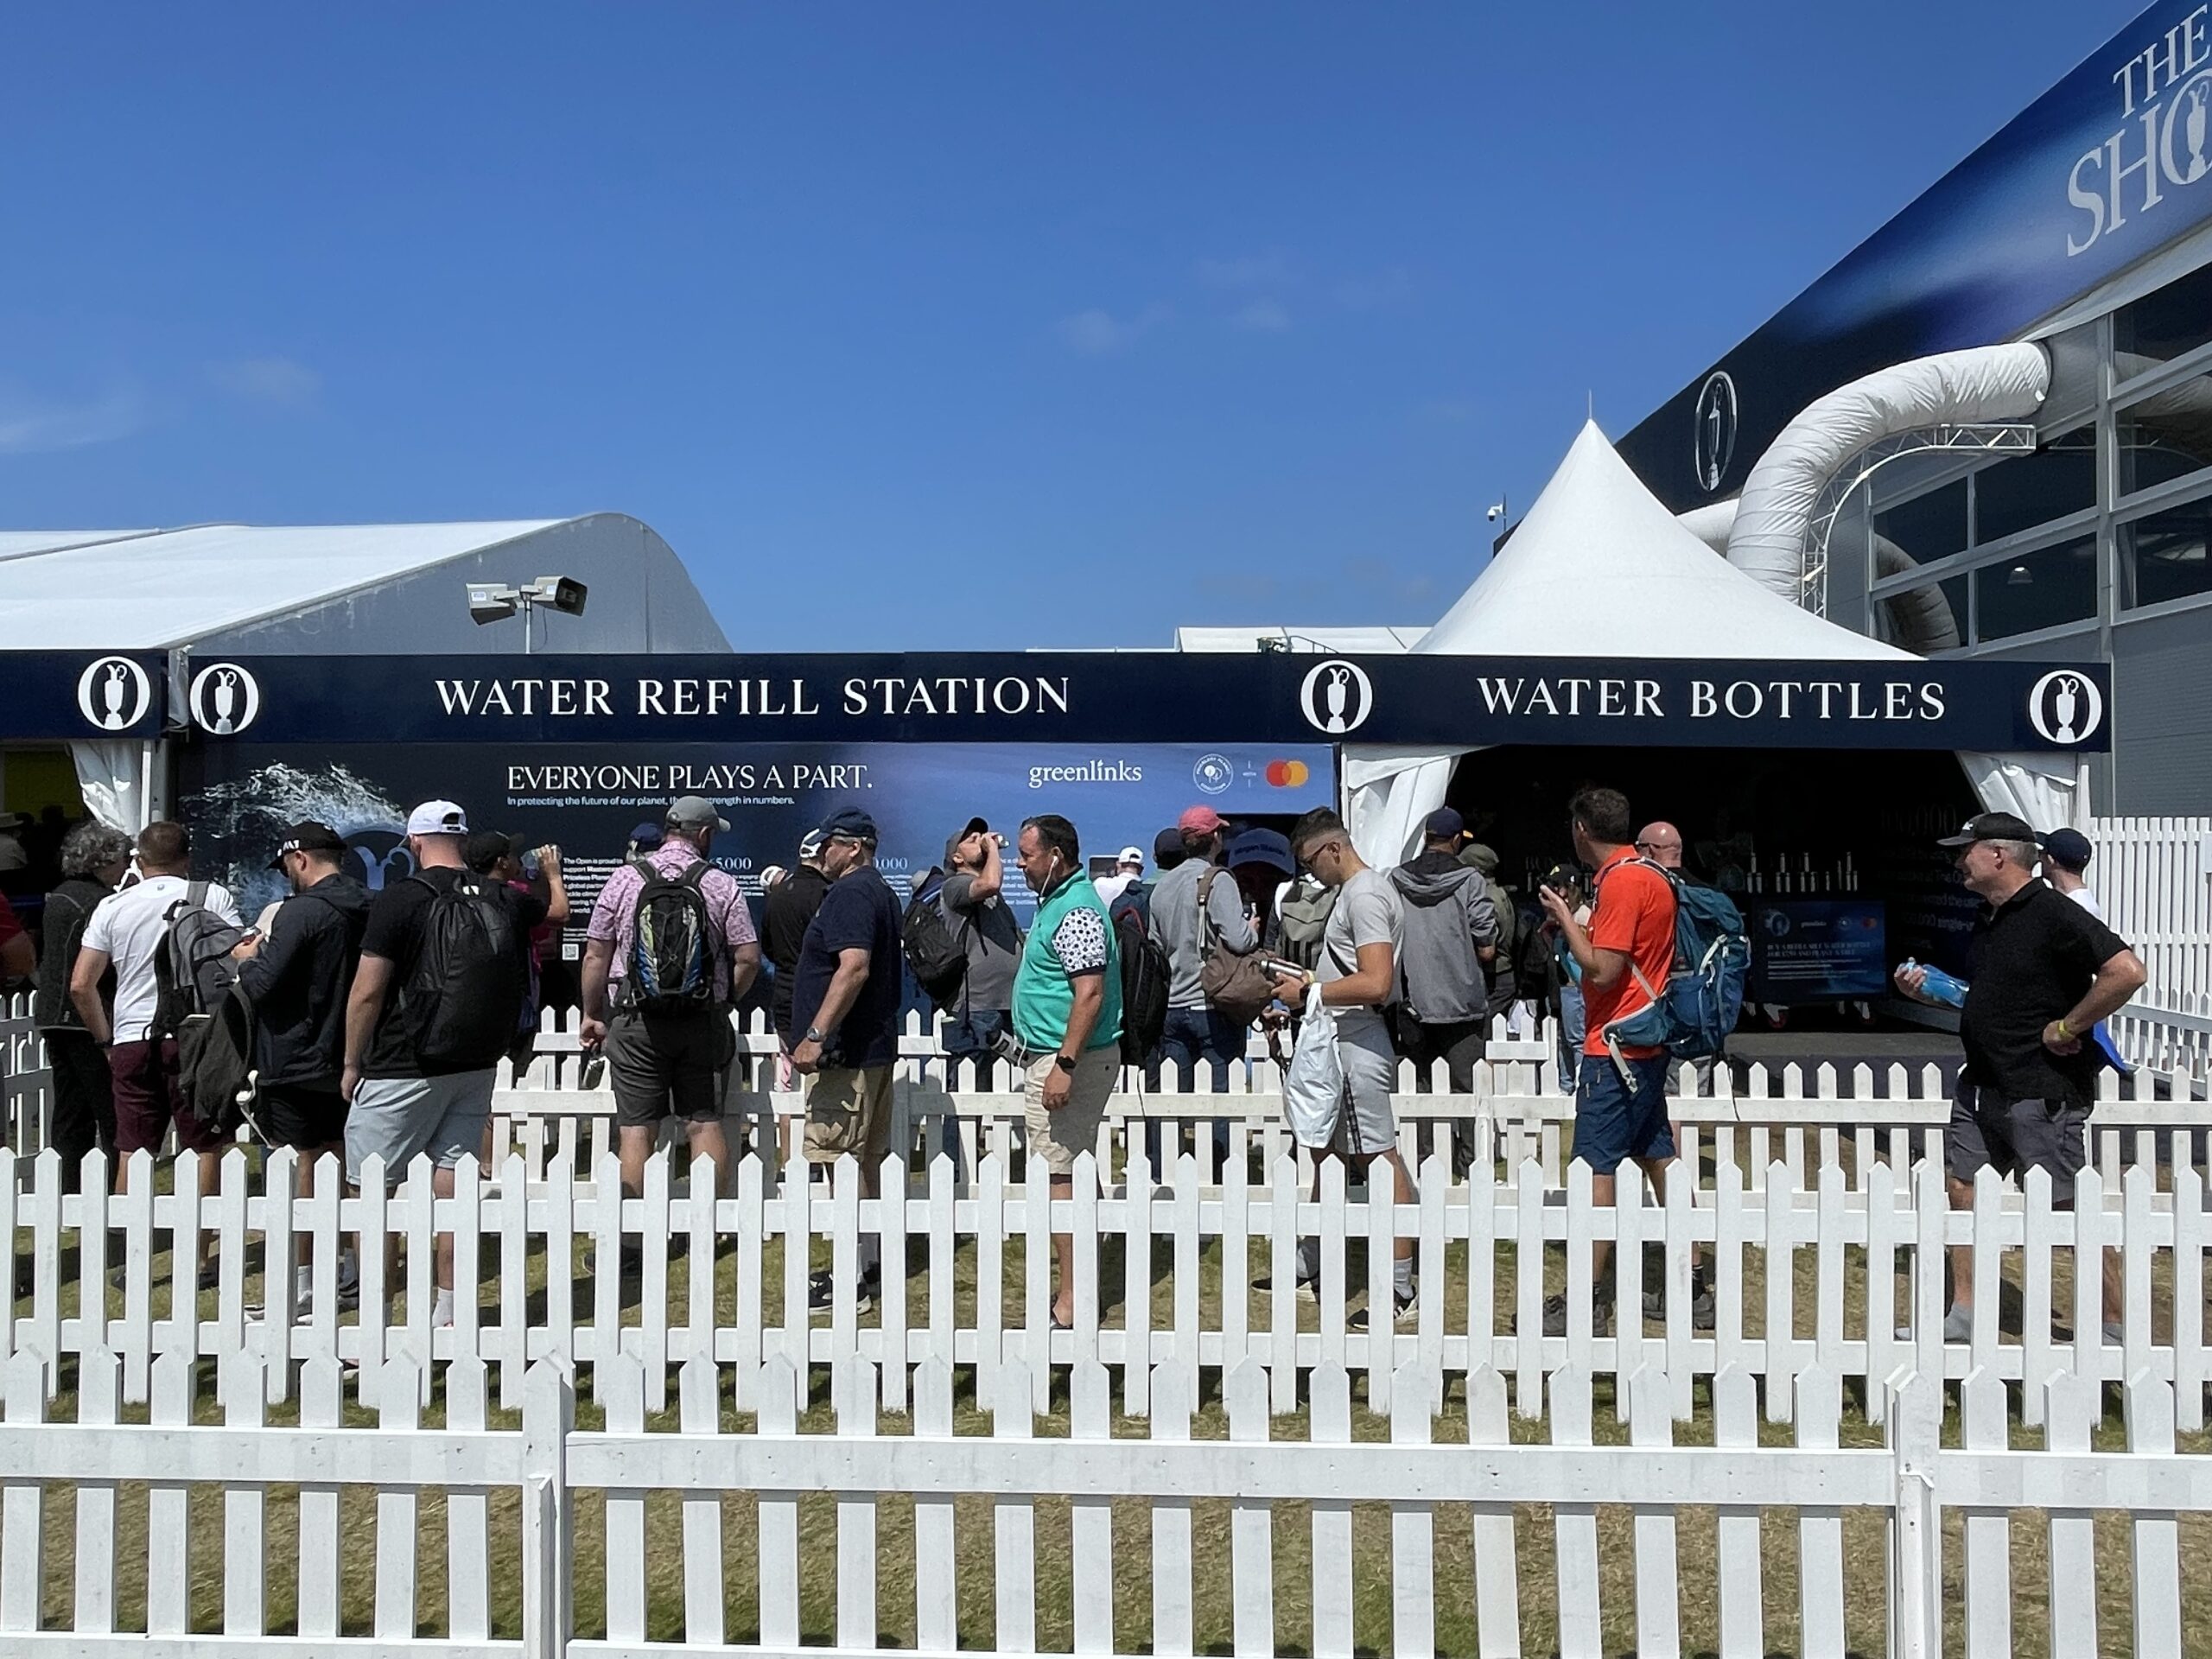 Bluewater deploys two mega-sized Water Wall hydration stations at The 151st Open to hydrate golf fans at Royal Liverpool